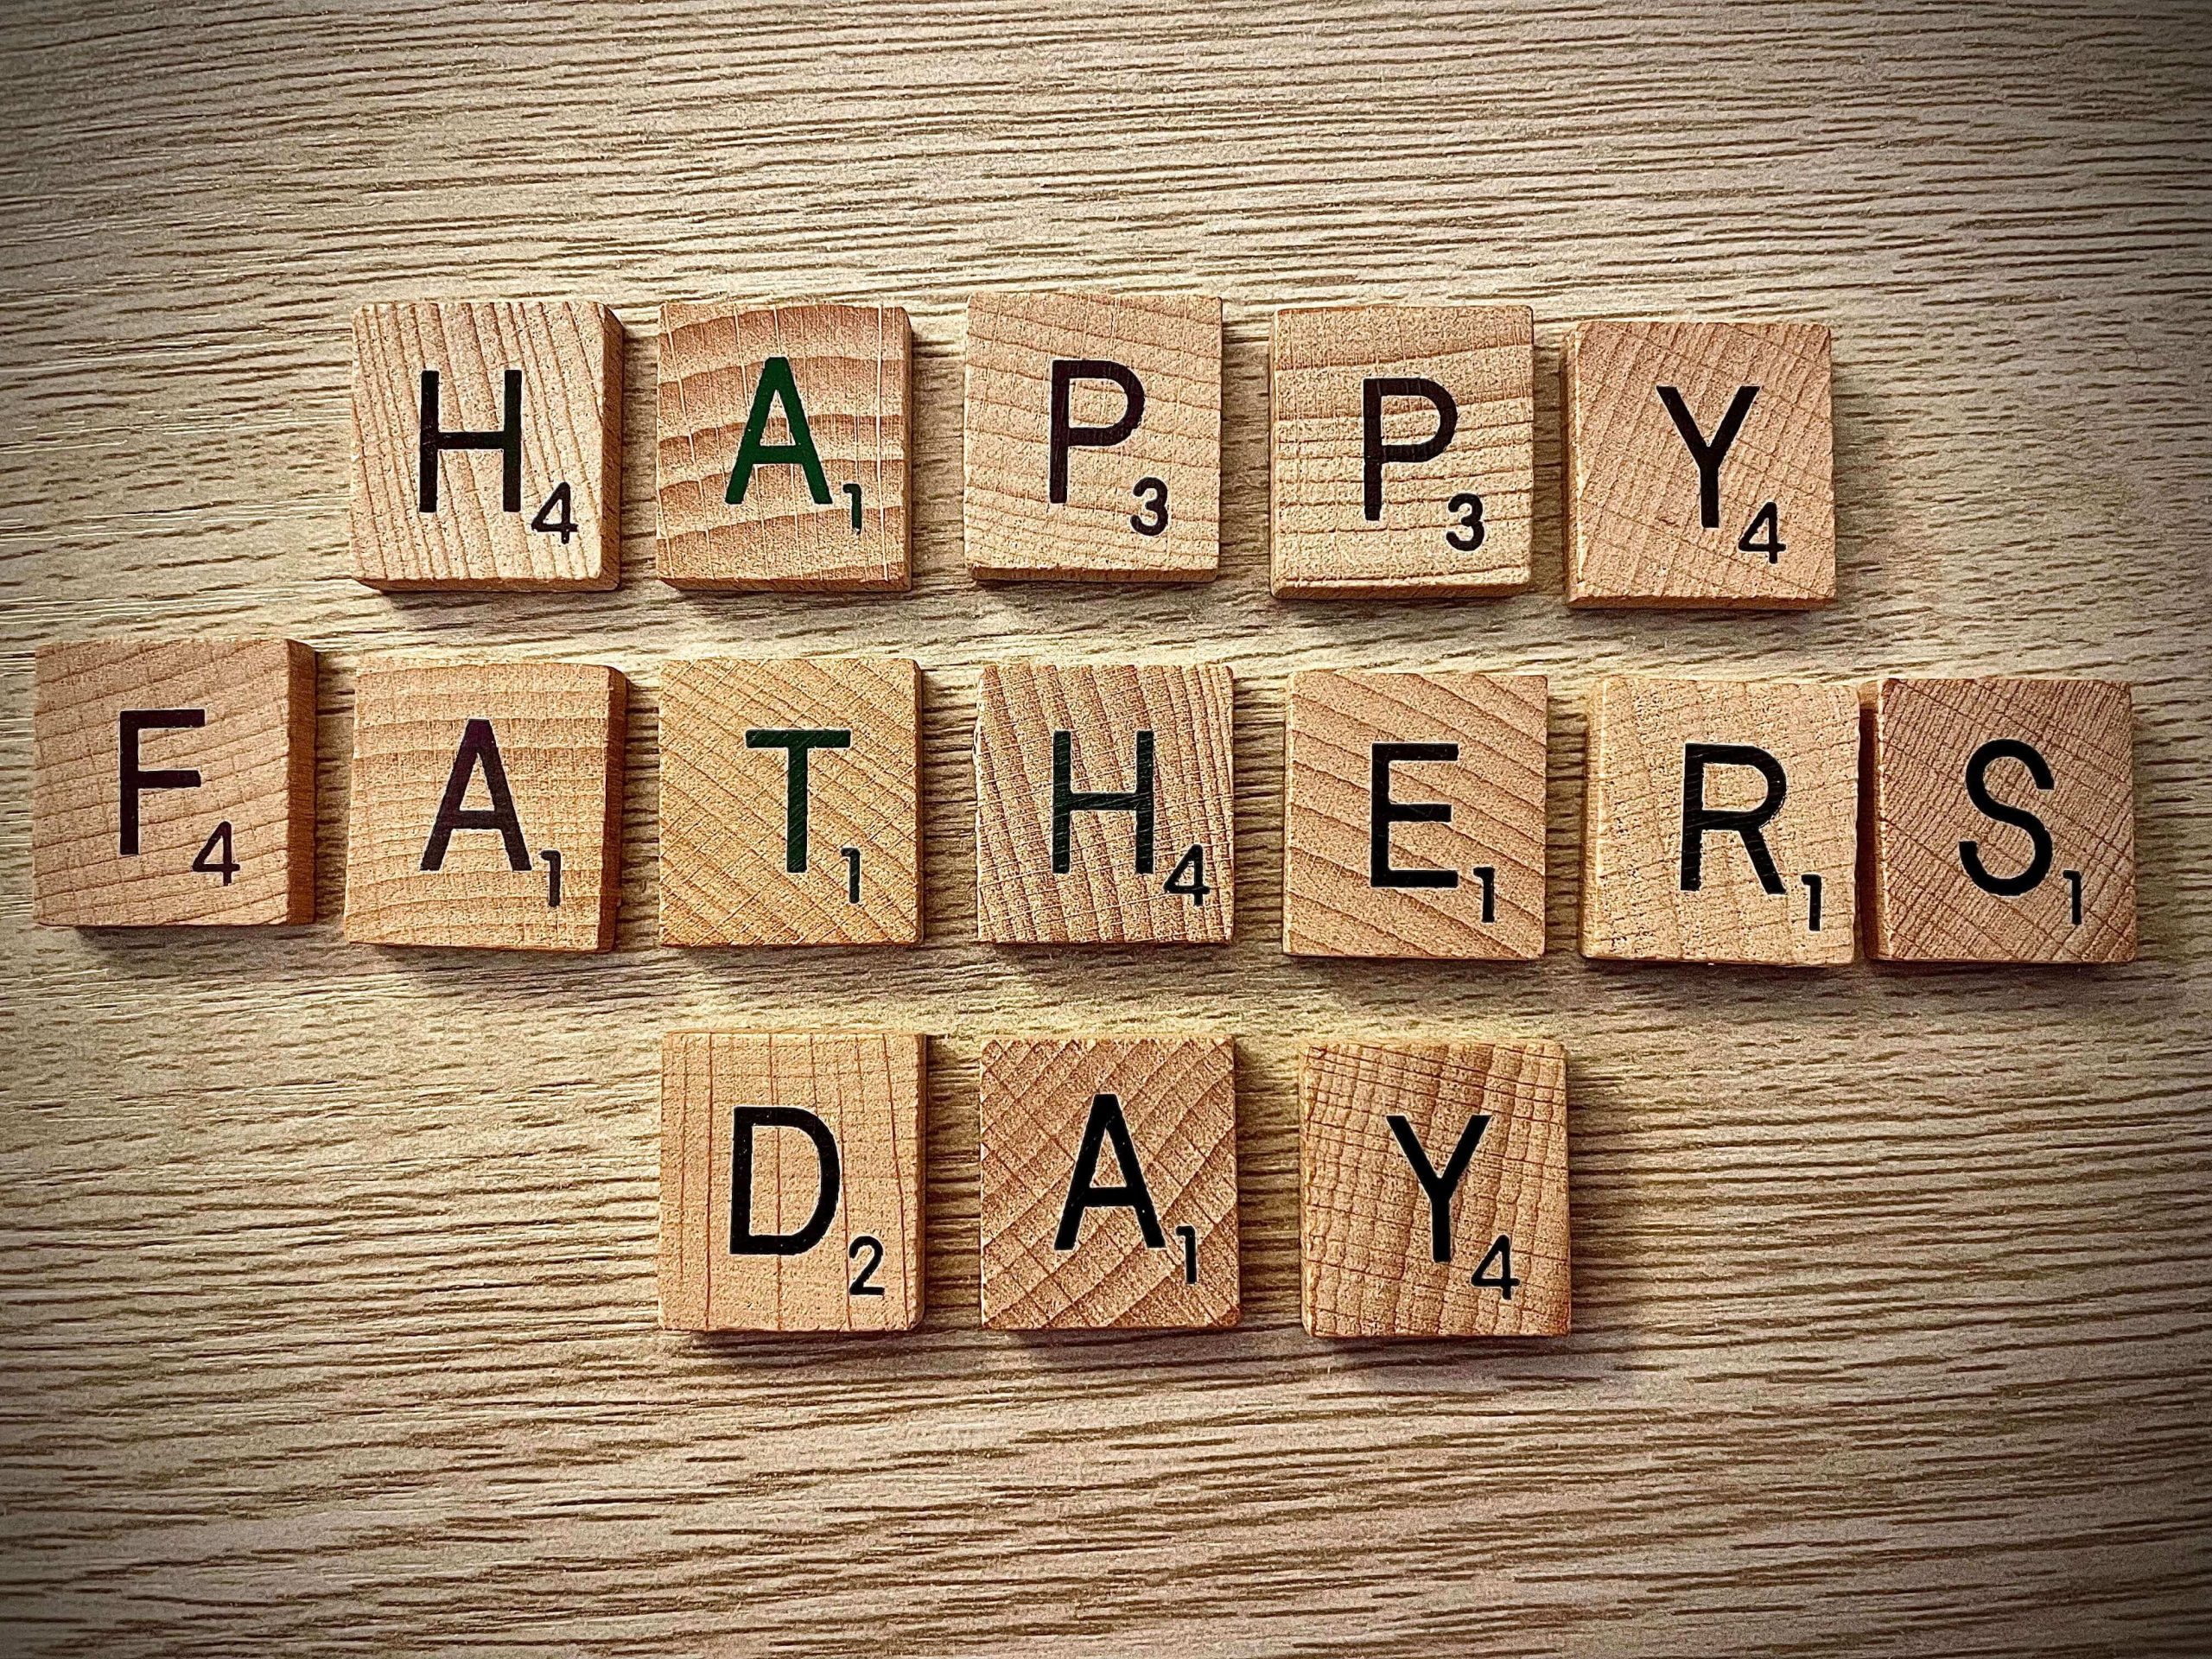 Fathers Day Gifts, hotels in west wales, the falcondale hotel, dog friendly hotels wales